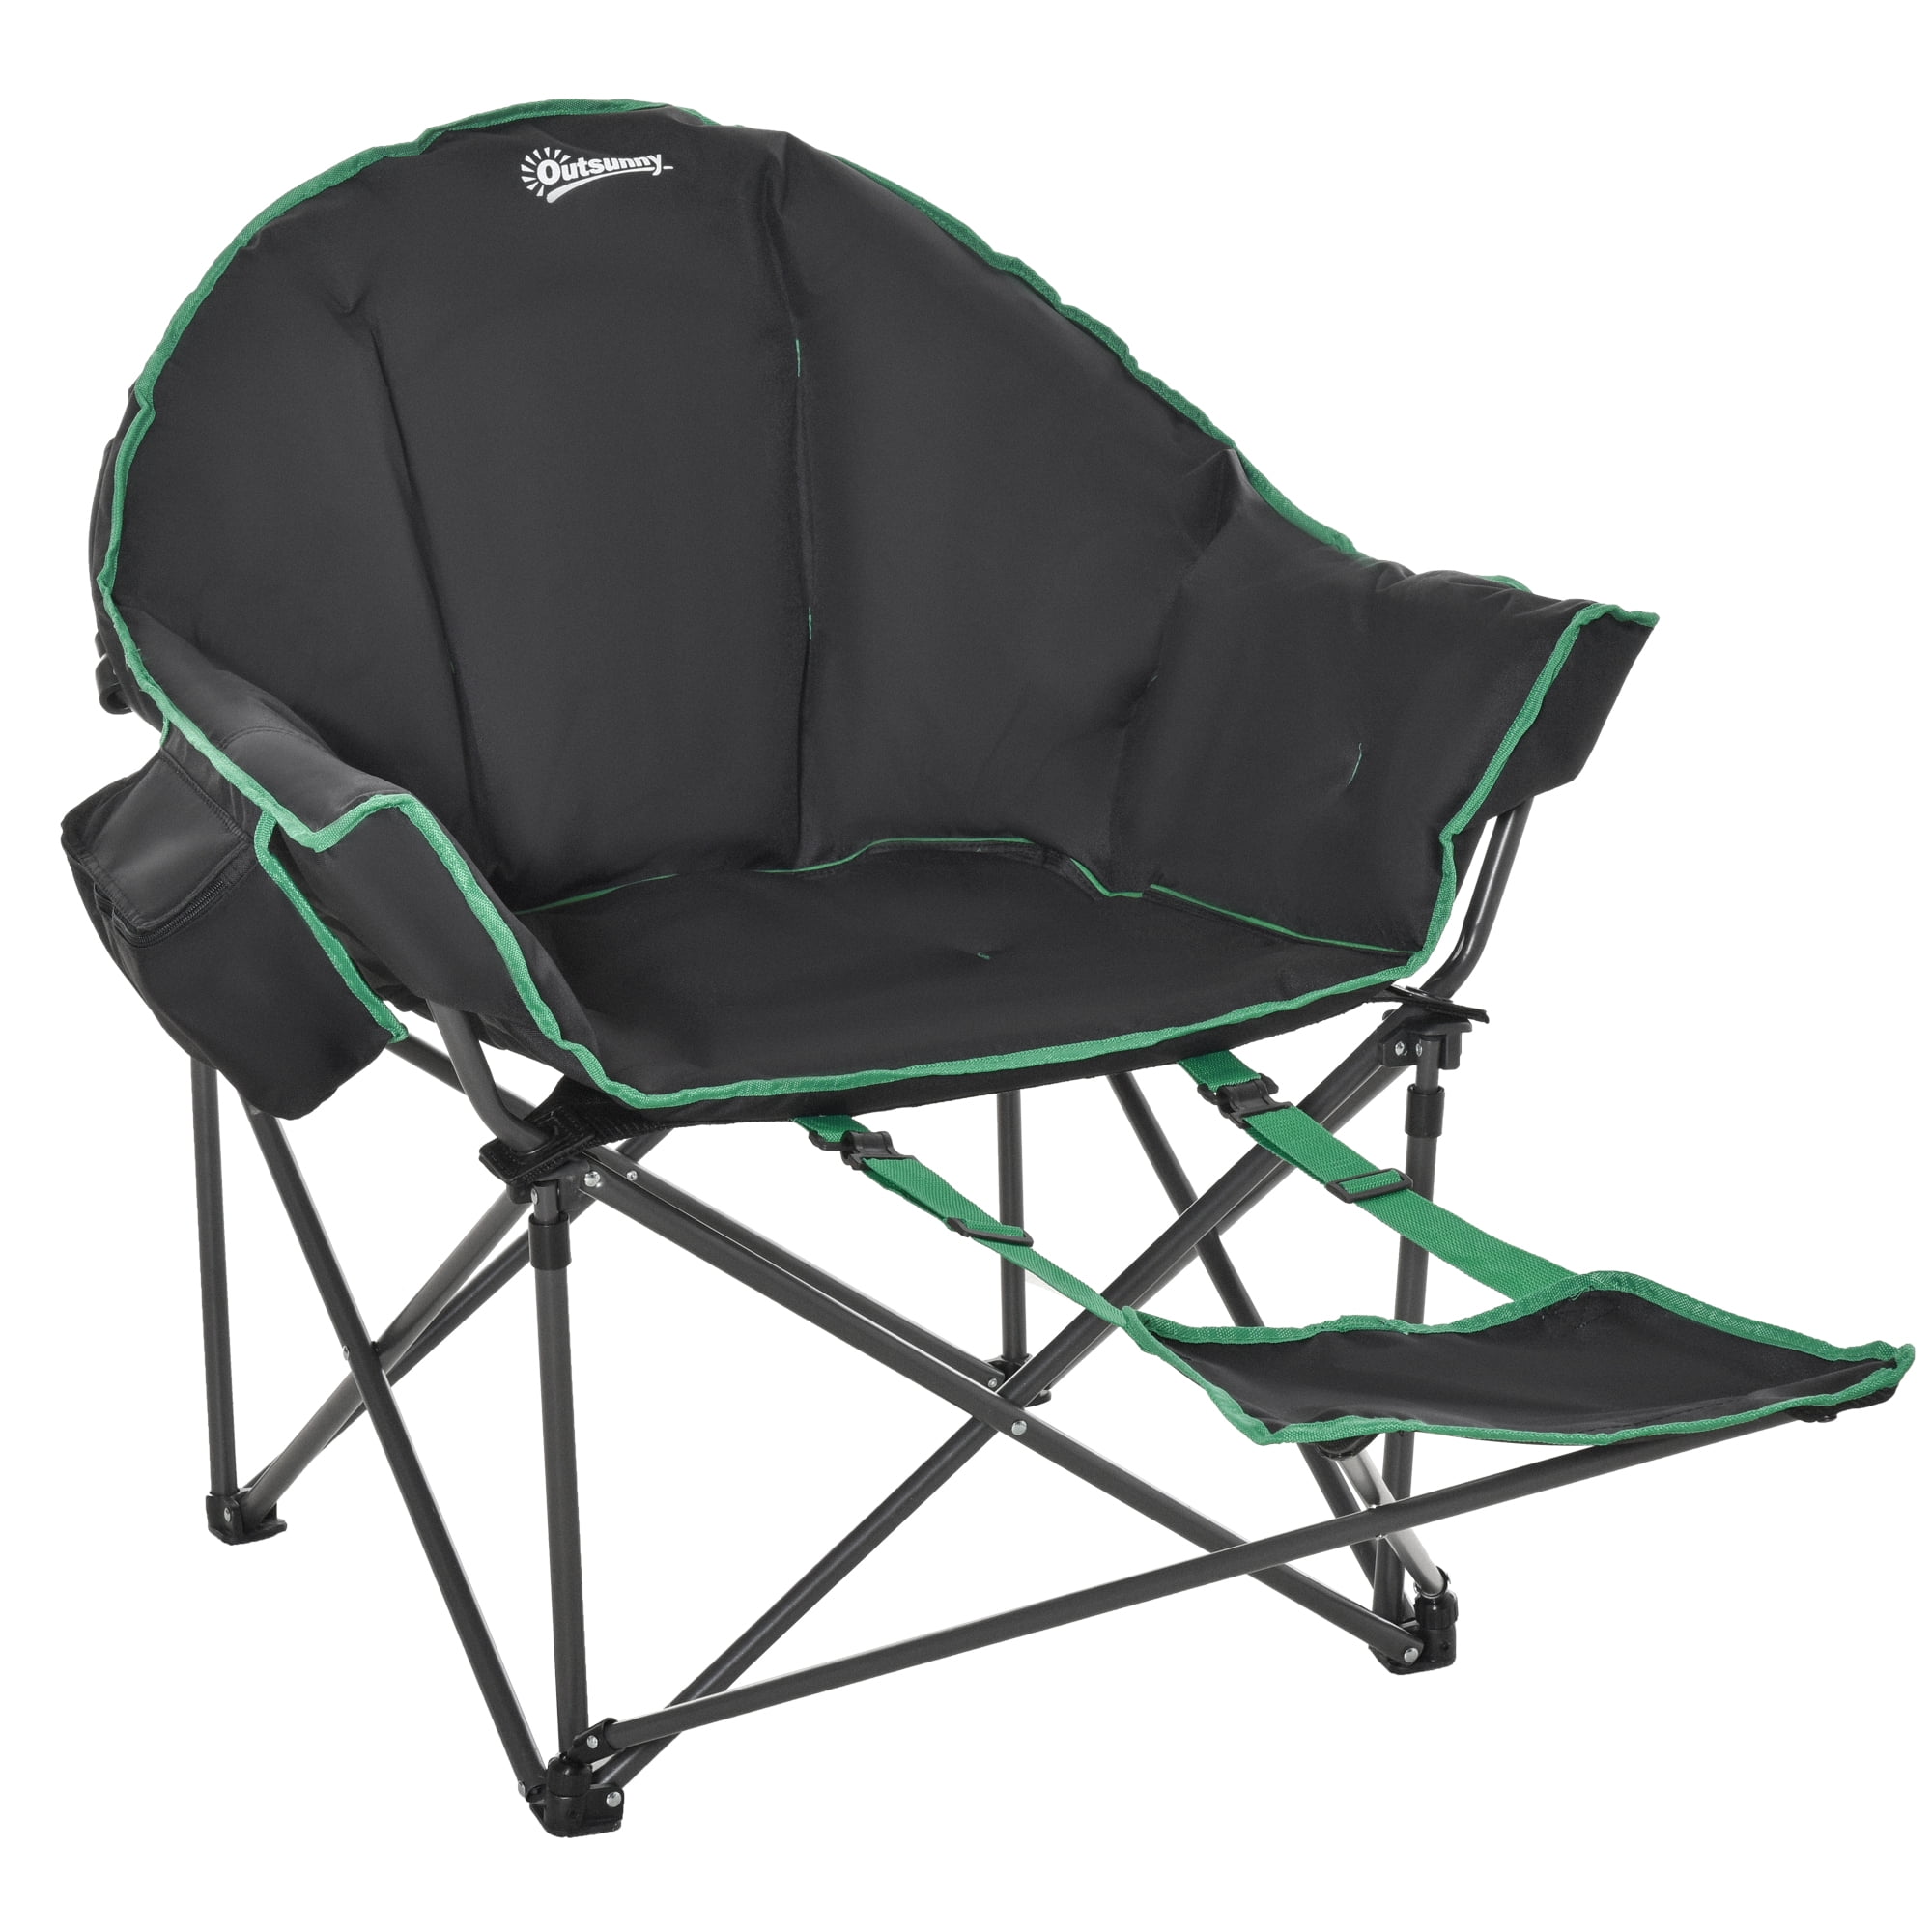 Outsunny Outdoor Folding Fishing Camping Chair w/Cup Holder,Pocket,Backrest Blue 